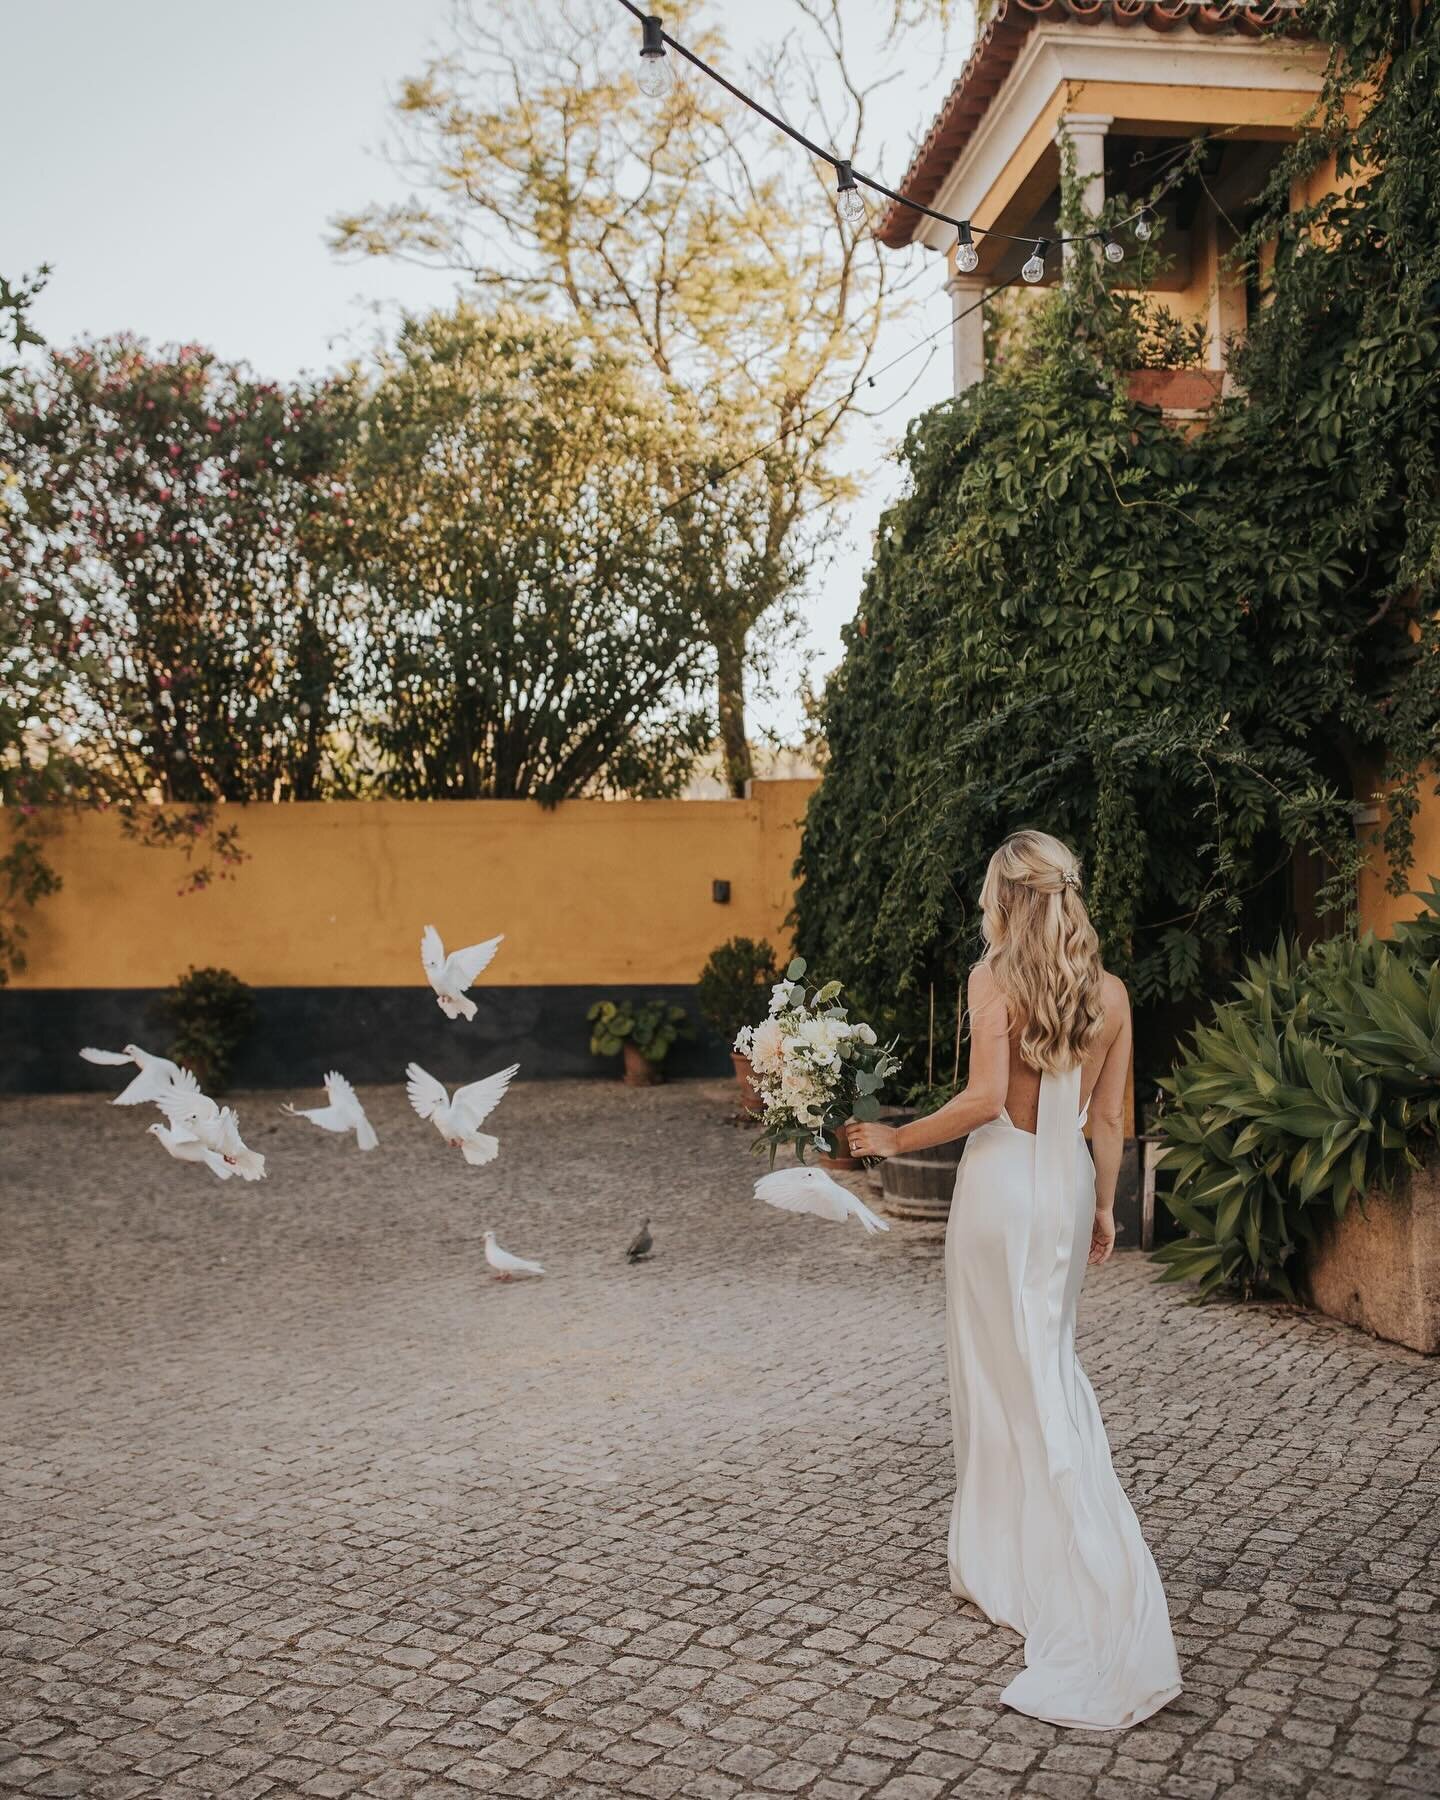 &ldquo;People always tell you that when you try on the right dress, you just know it&rsquo;s the one and that was definitely the feeling I had when I tried it on. It is truly a magical dress. My experience at Halfpenny was truly amazing, from the mom